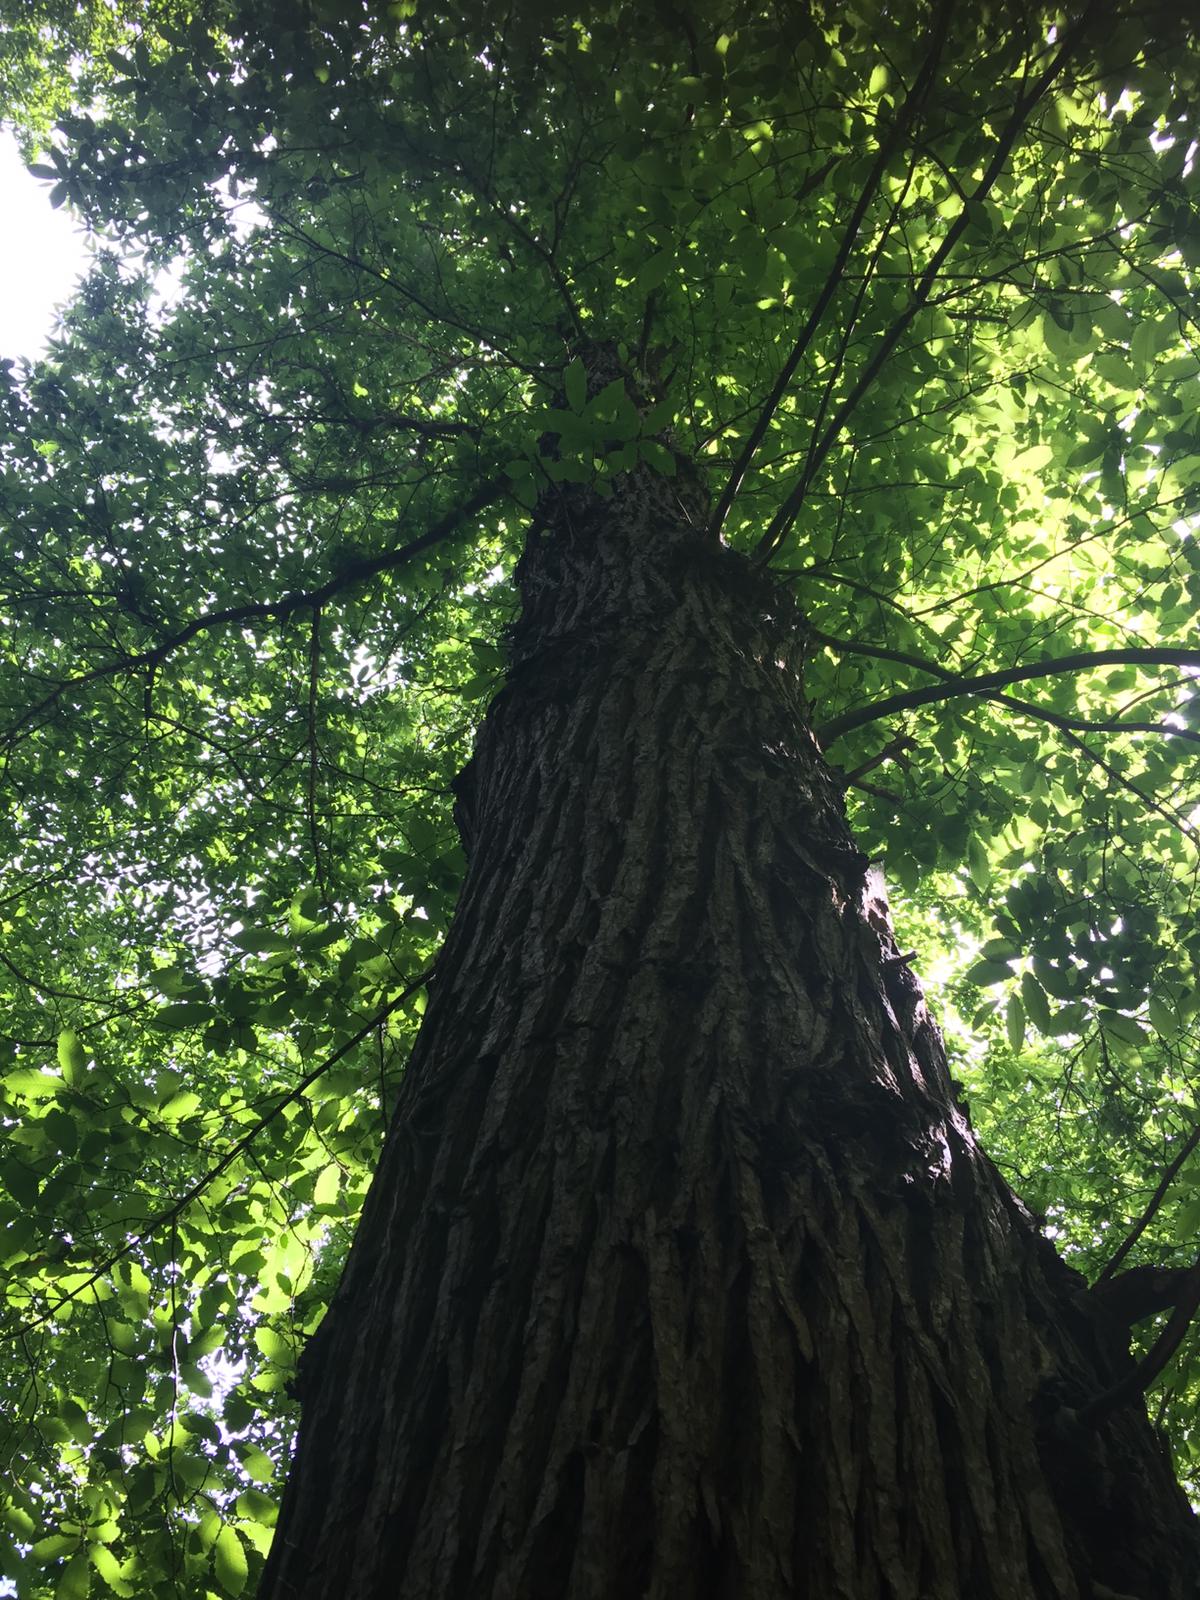 Trunk of large tree looking up to its leaves at the top